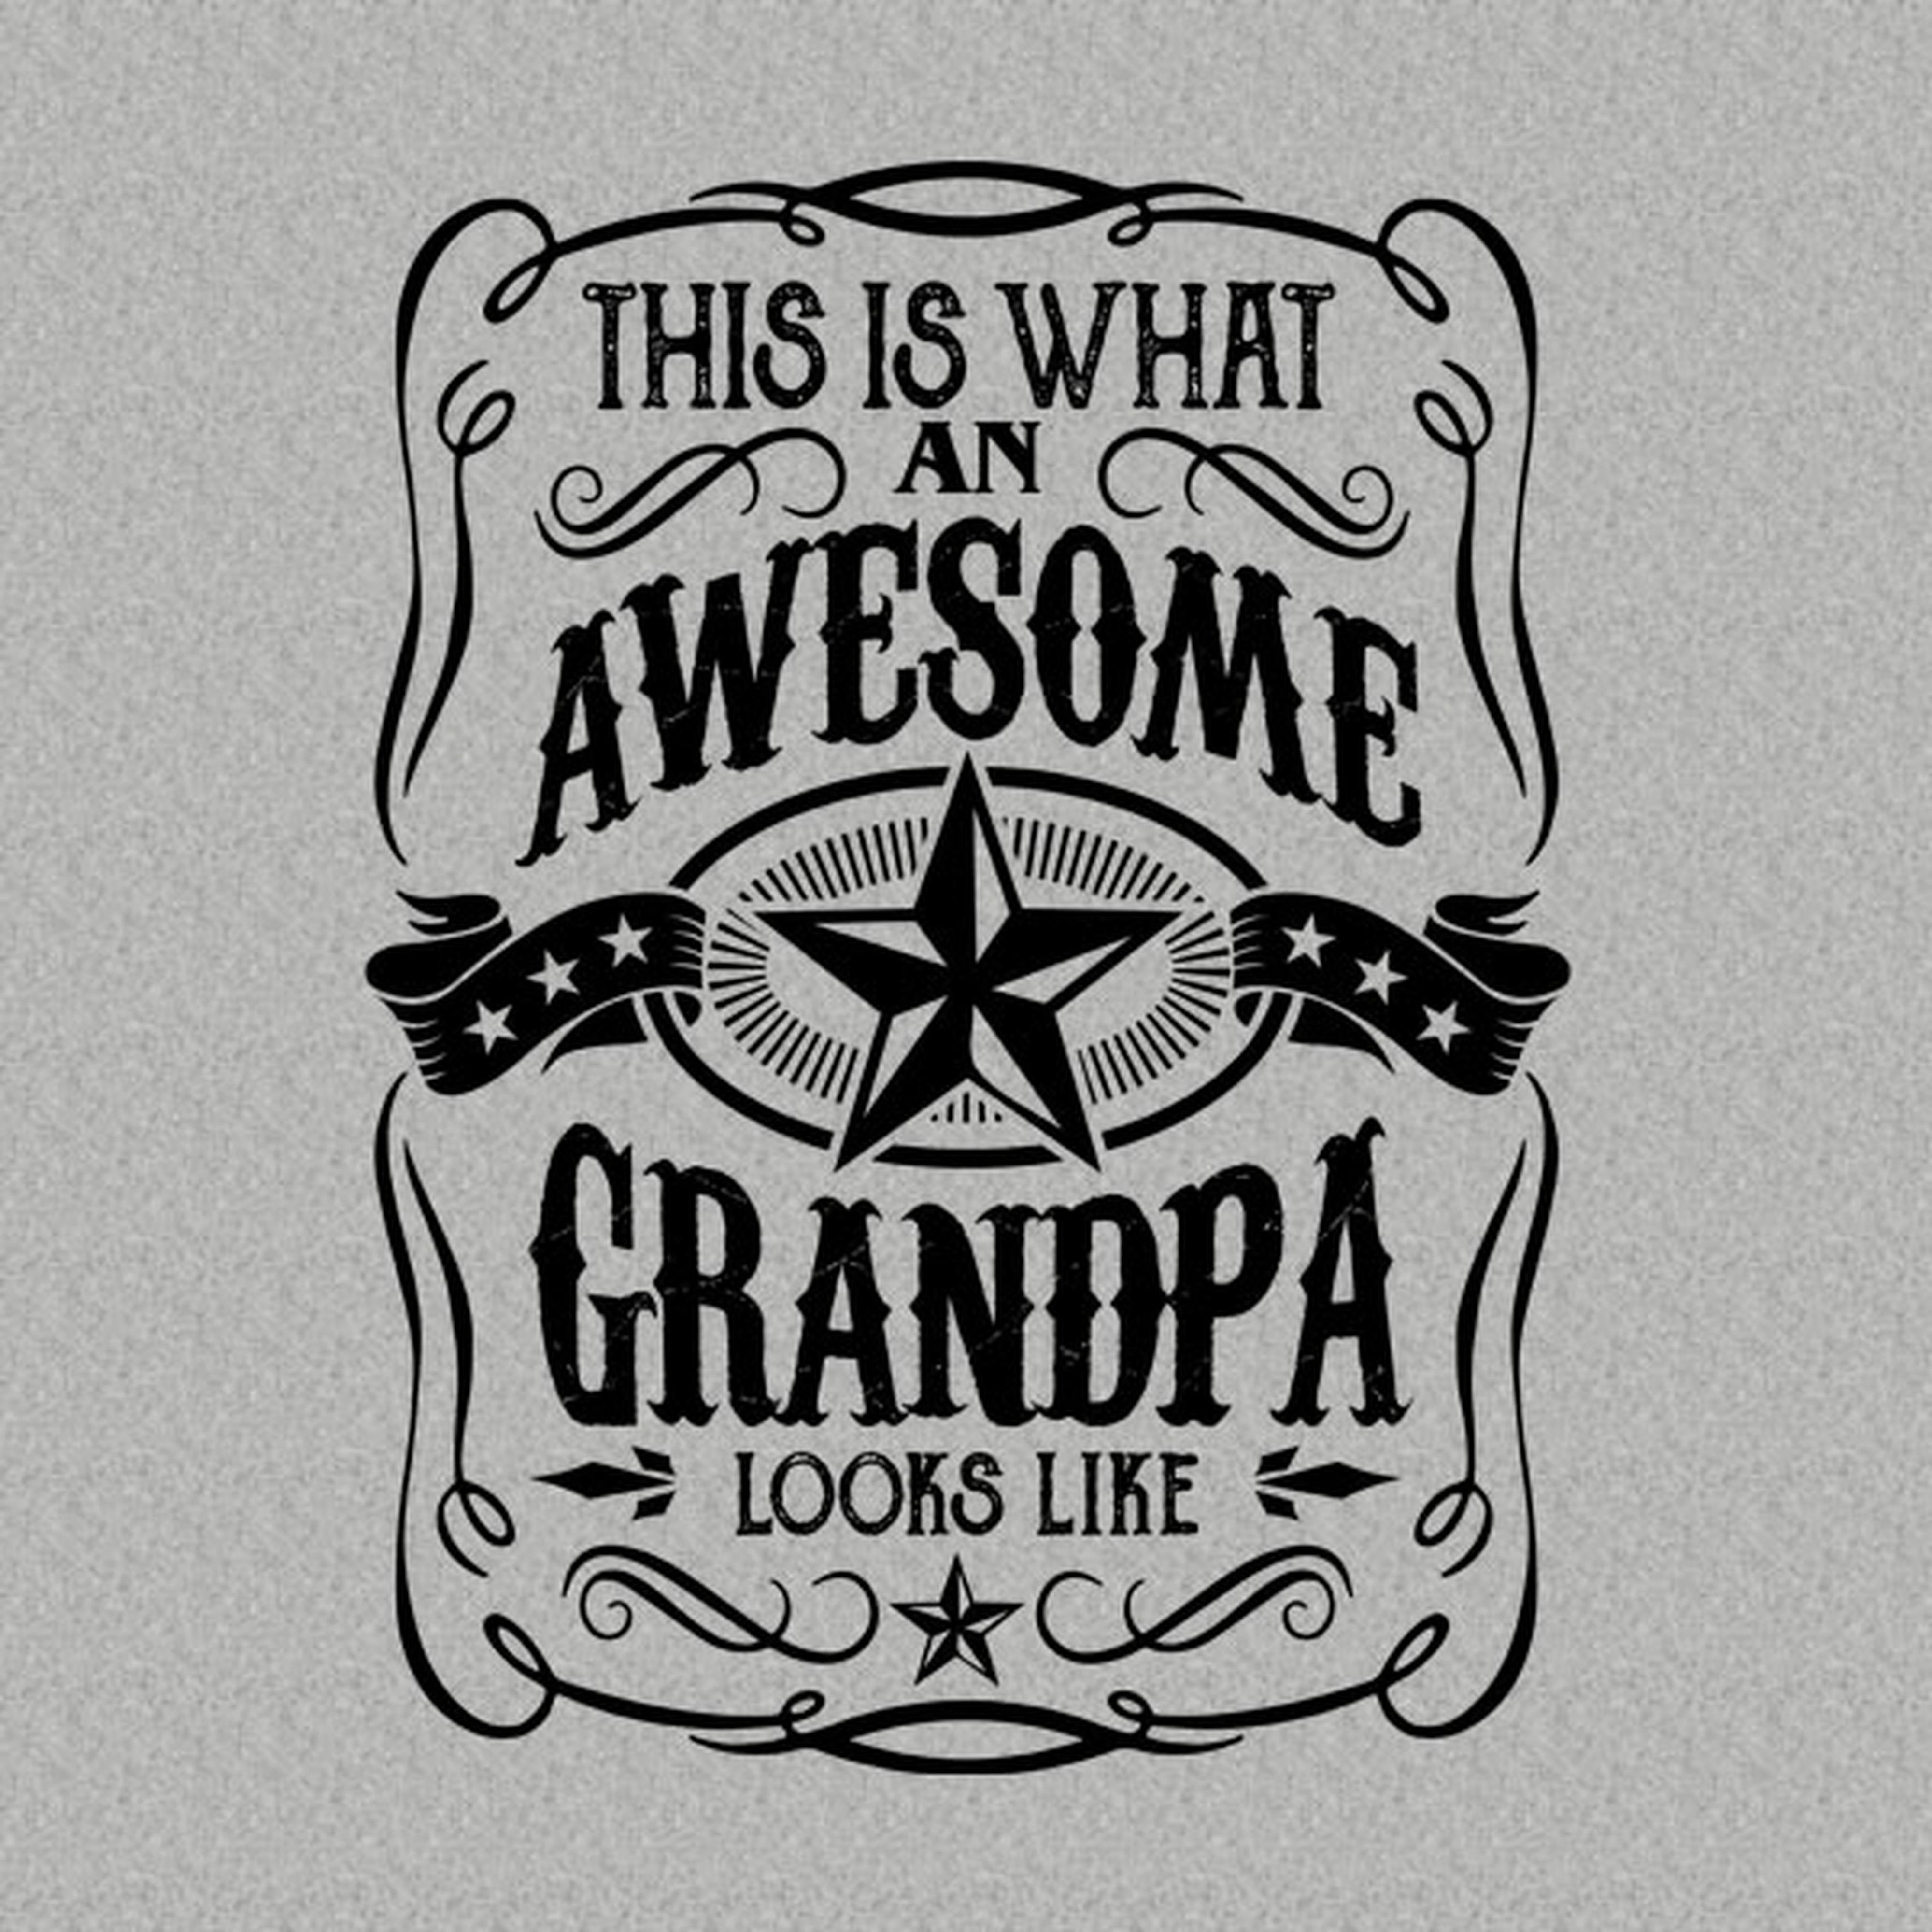 This is what an awesome grandpa looks like - T-shirt